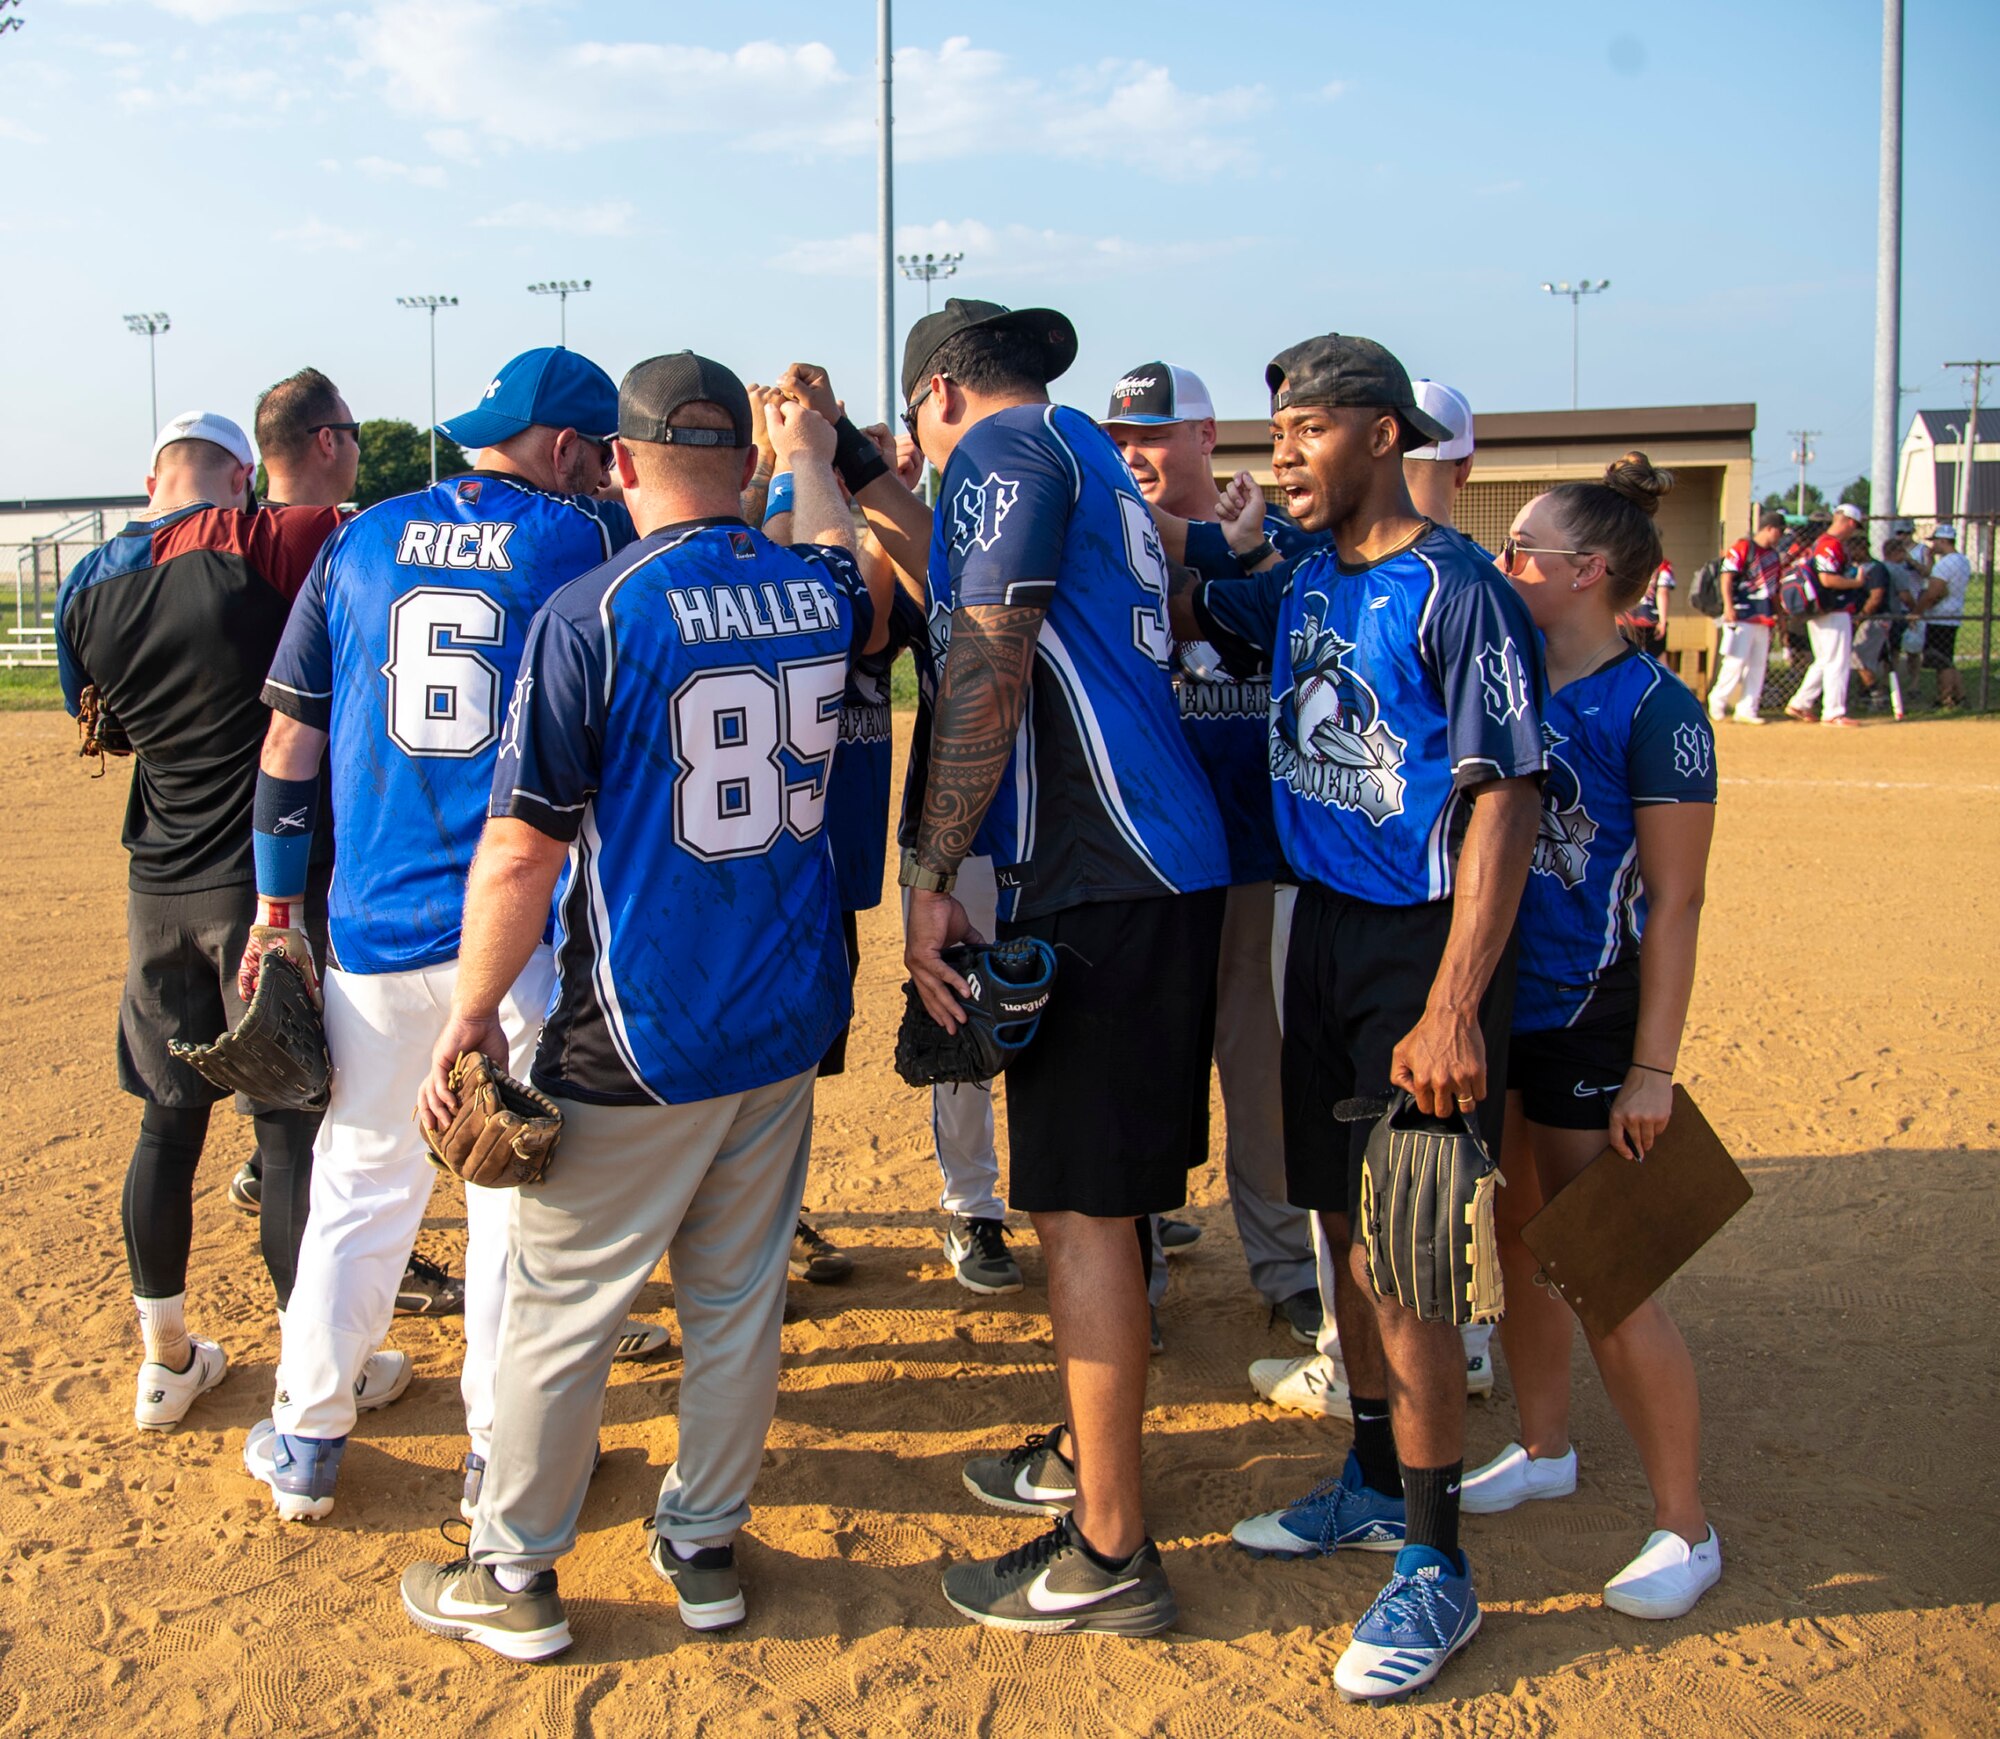 Airmen from the 436th Security Forces Squadron cheer after winning their intramural softball game on Dover Air Force Base, Delaware, July 26, 2021. The 436th SFS won the game 13-4. (U.S. Air Force photo by Tech. Sgt. Nicole Leidholm)